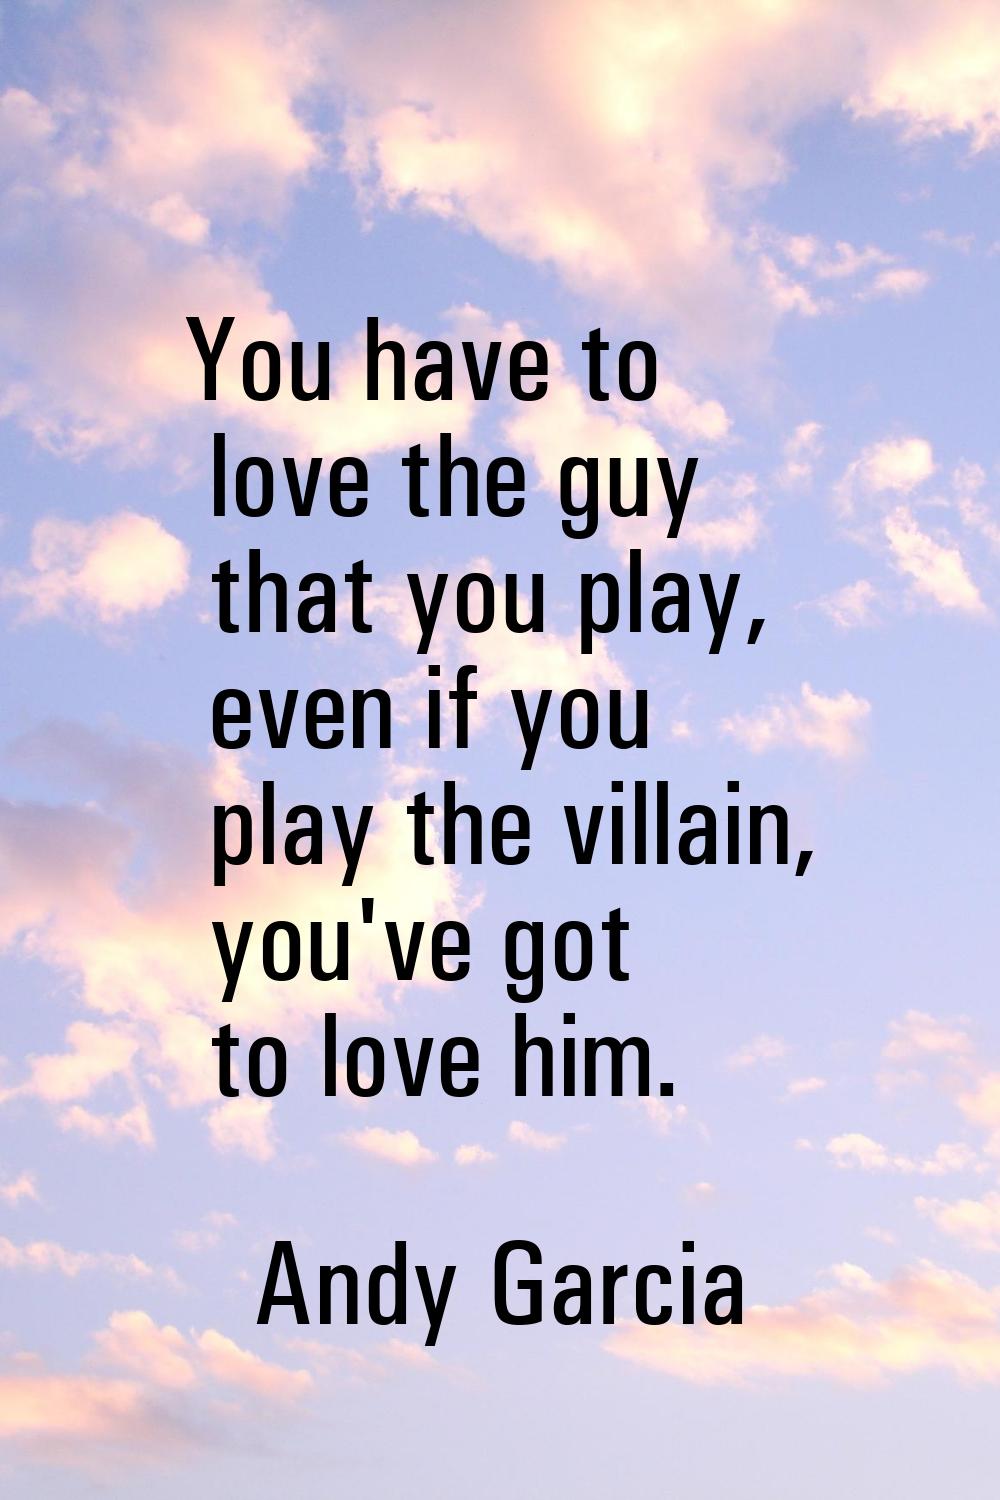 You have to love the guy that you play, even if you play the villain, you've got to love him.